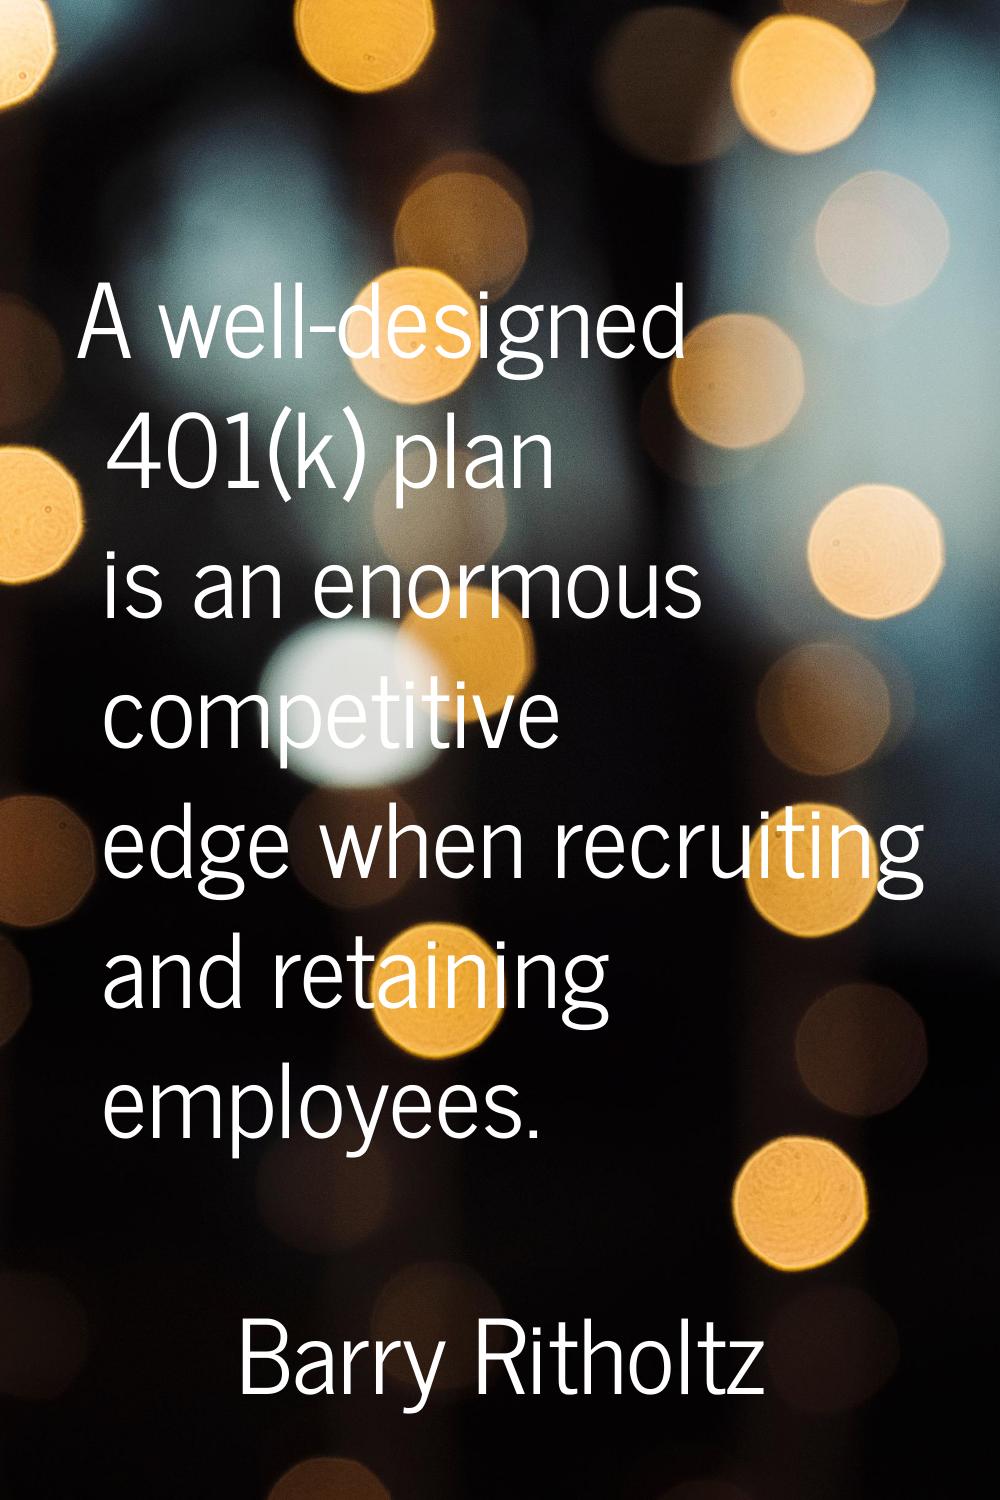 A well-designed 401(k) plan is an enormous competitive edge when recruiting and retaining employees